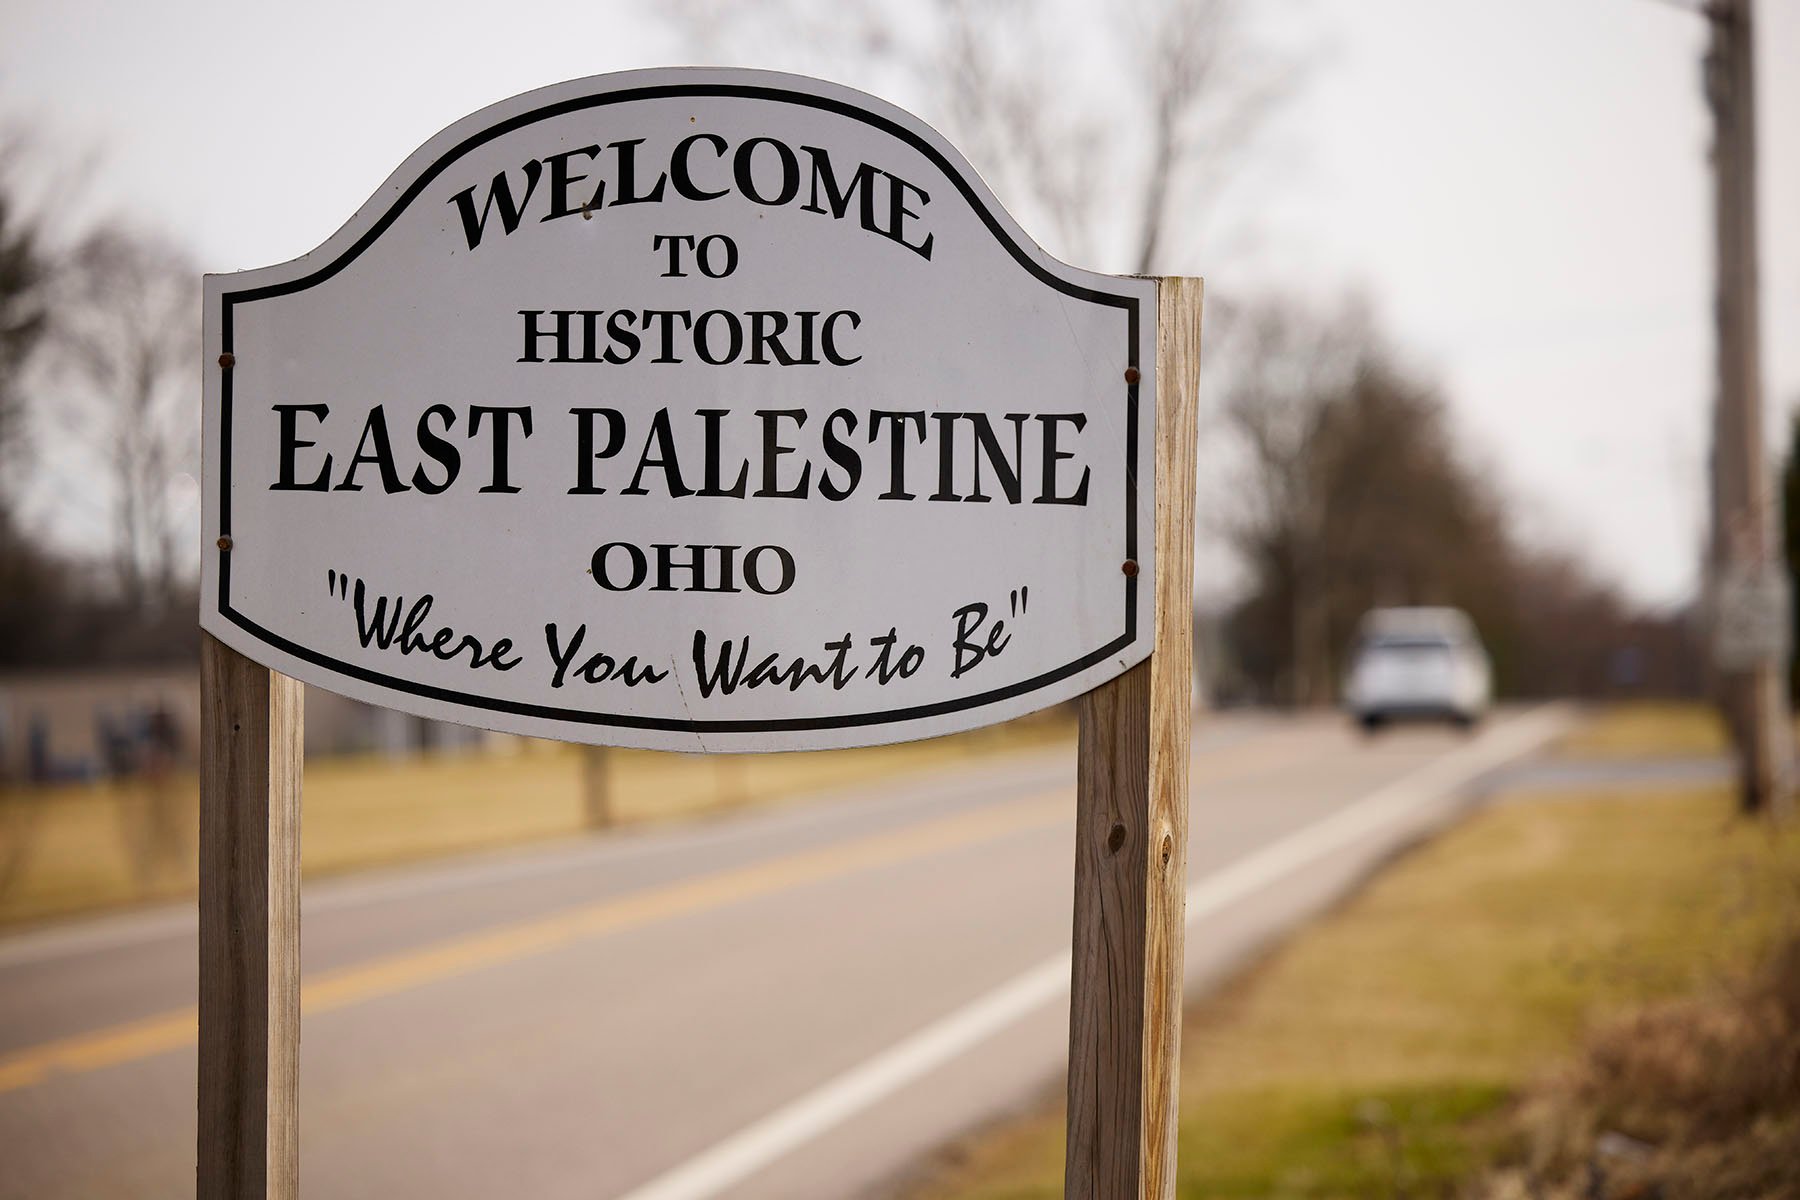 A sign welcomes visitors to the town of East Palestine, Ohio.